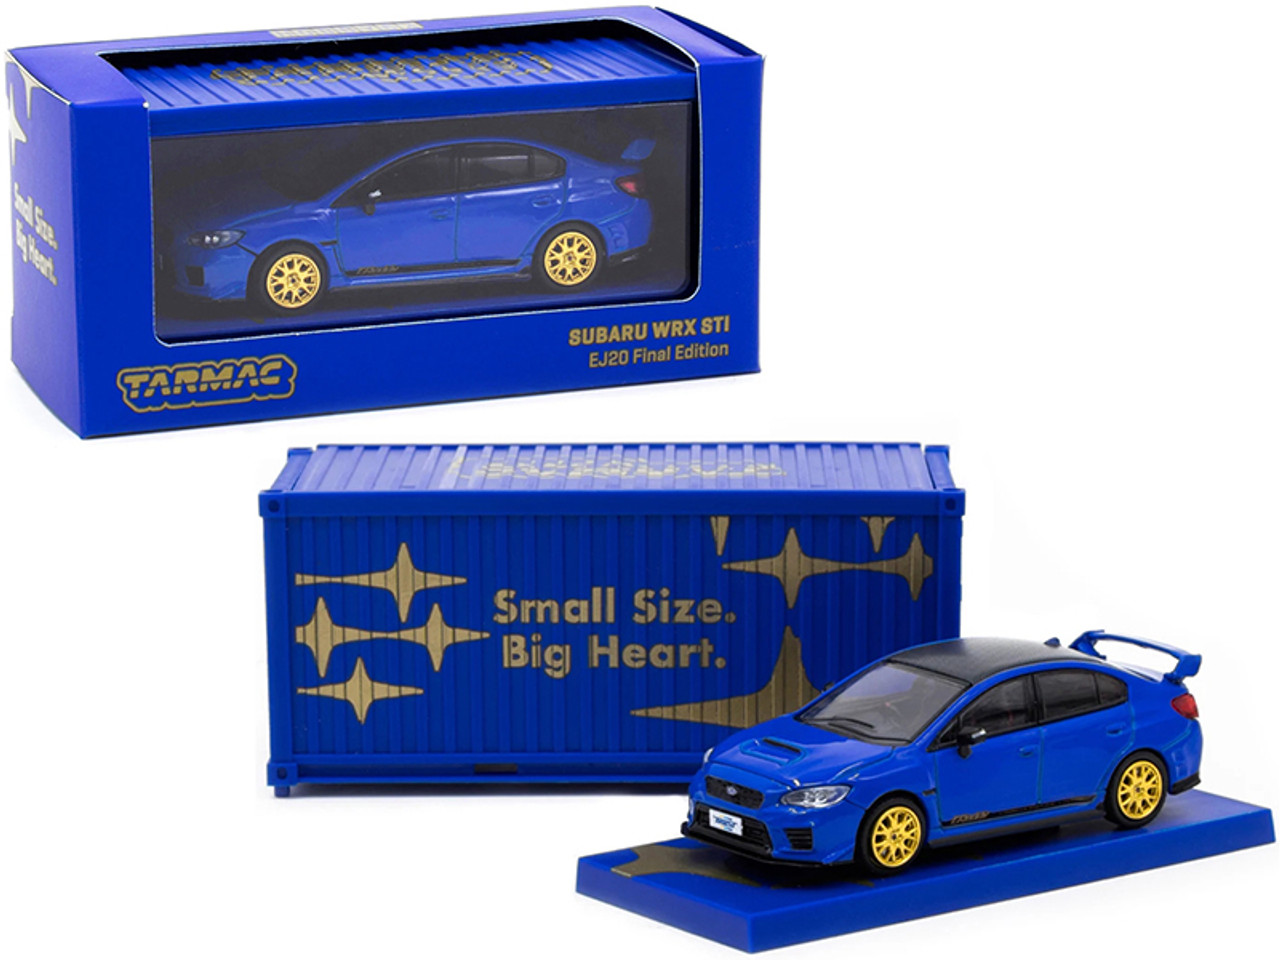 Subaru WRX STi EJ20 Final Edition Blue with Gold Wheels with Container 1/64 Diecast Model Car by Tarmac Works